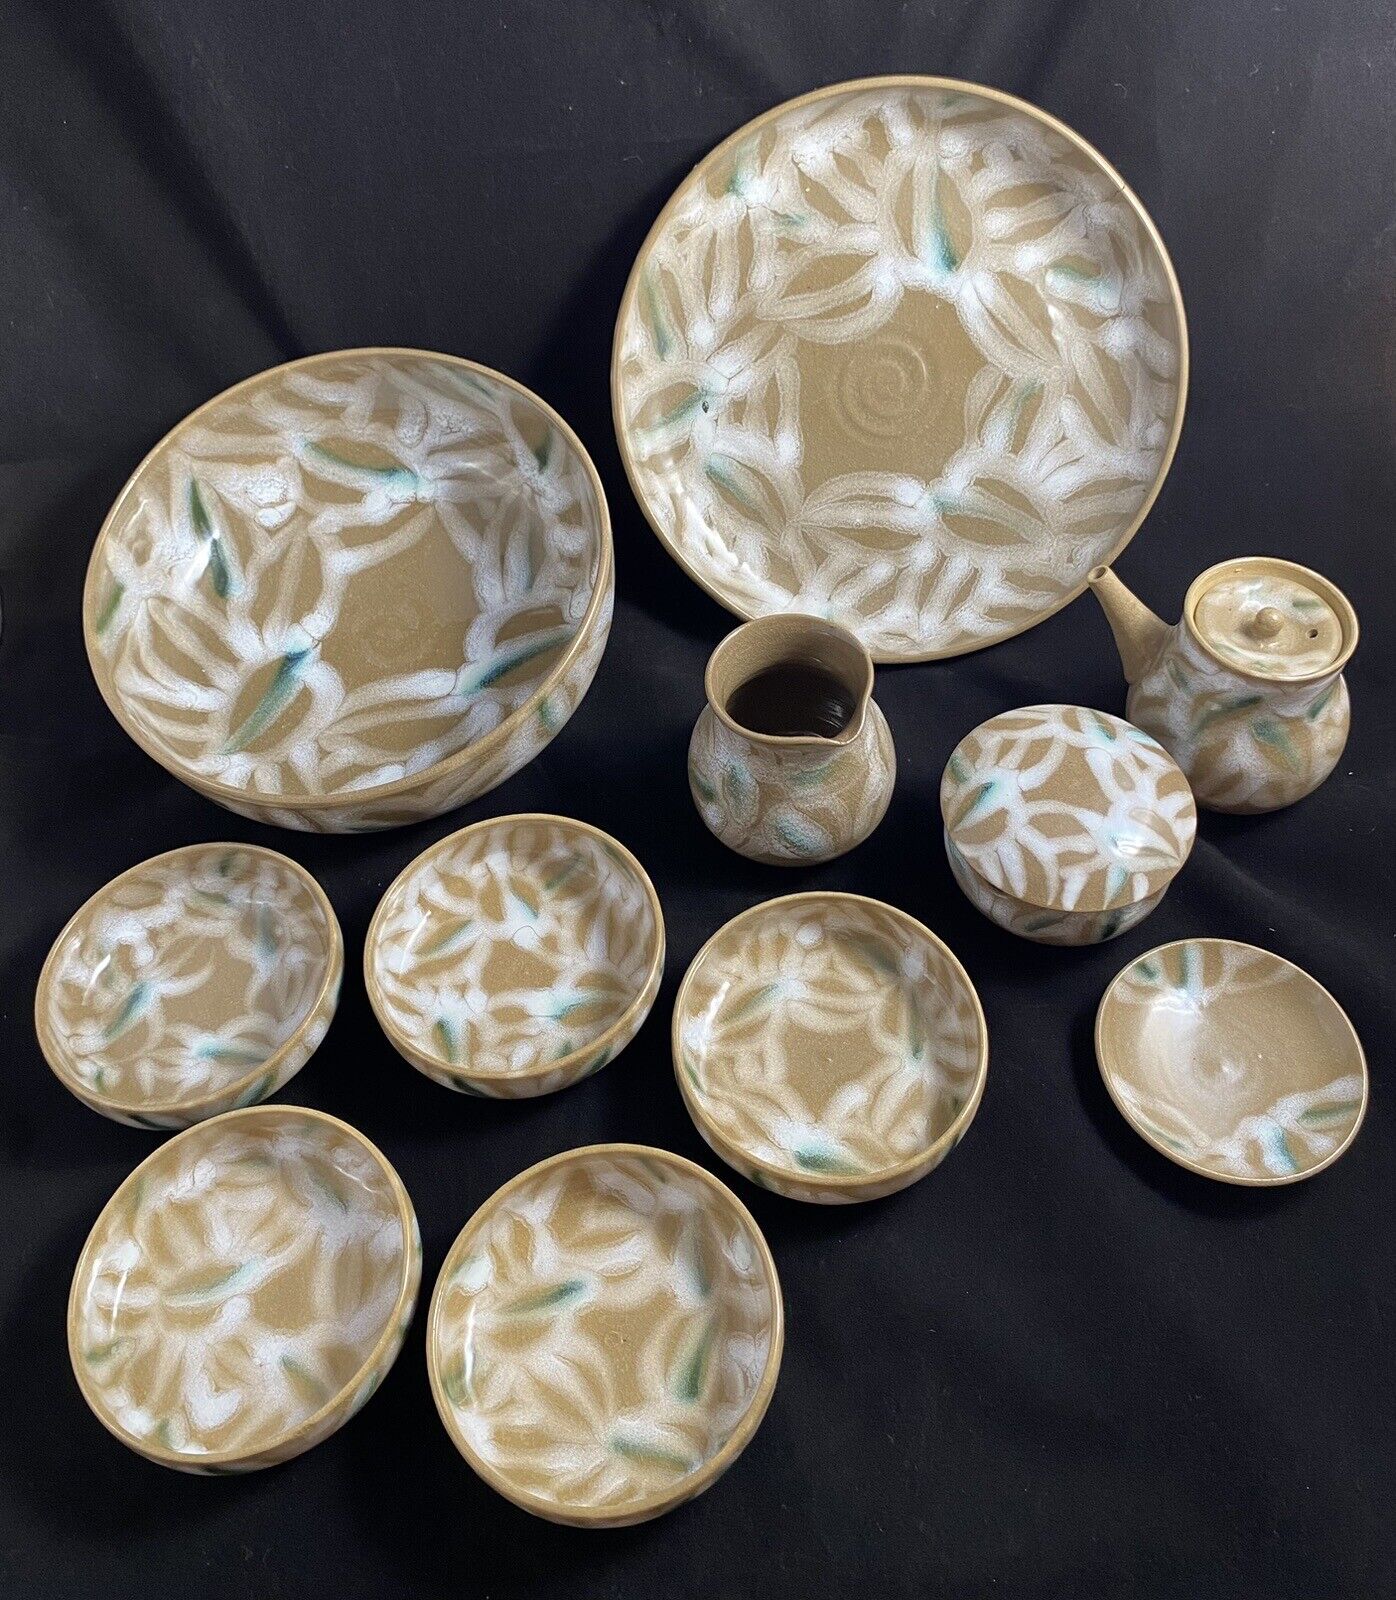 Authentic Japanese Cracked Glaze Clay Tableware With Brown, White, Emerald Green